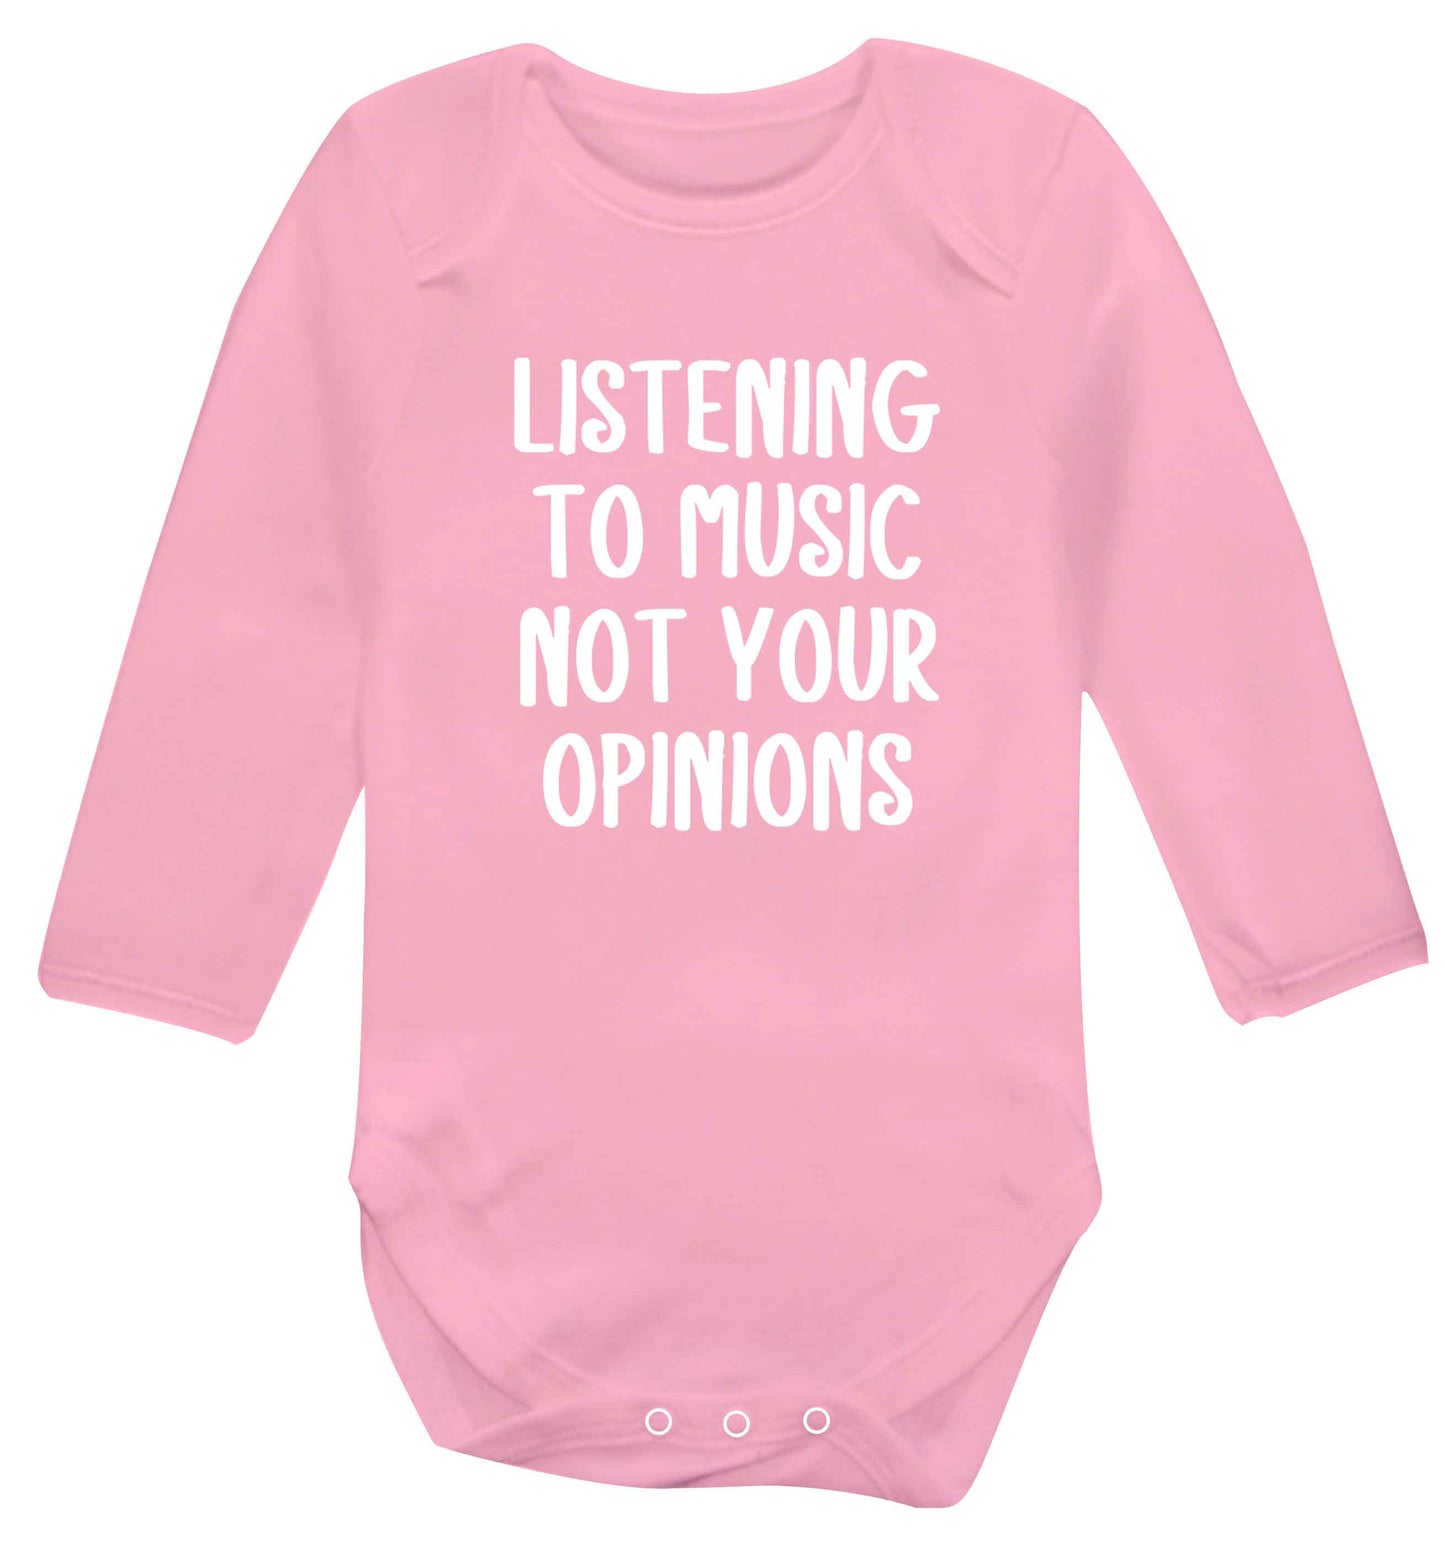 Listening to music not your opinions baby vest long sleeved pale pink 6-12 months